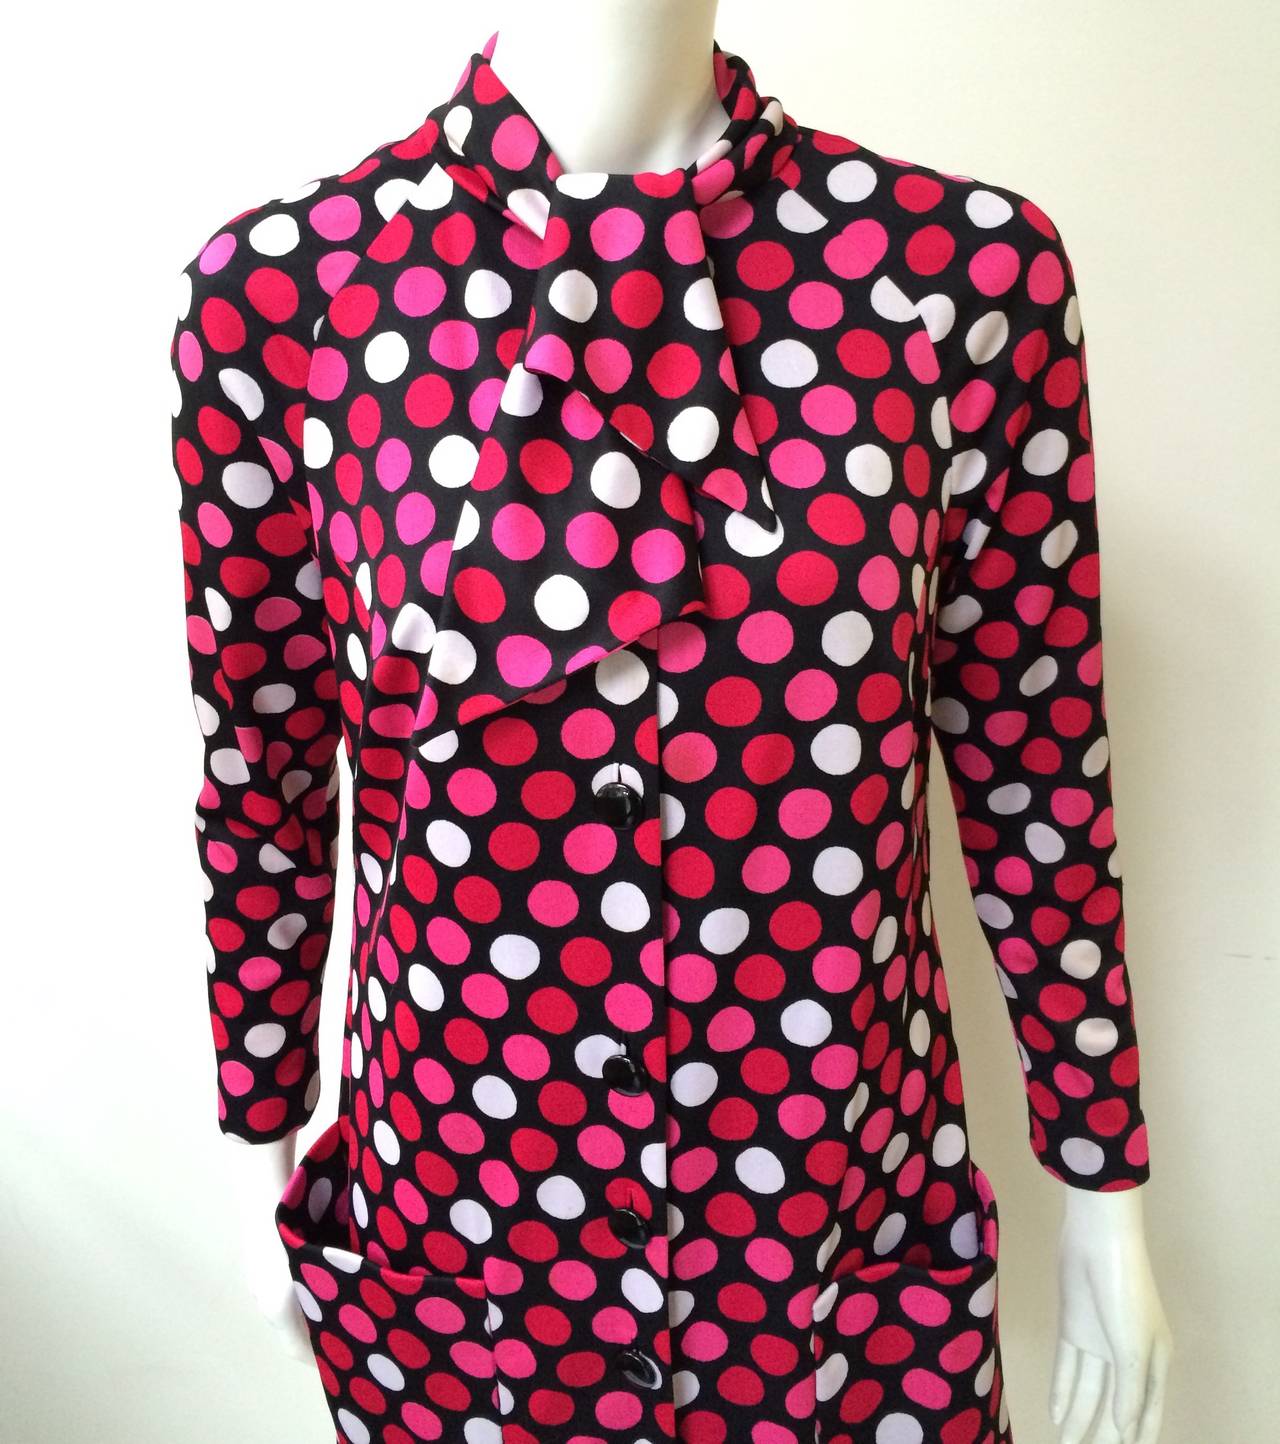 Pauline Trigere for Stanley Korshak of Chicago 80s polka dot dress with collar scarf and front pockets. Backside of dress has inverted pleat. White, pink & red dots against the black background will put a smile on your face. Has belt loops but did